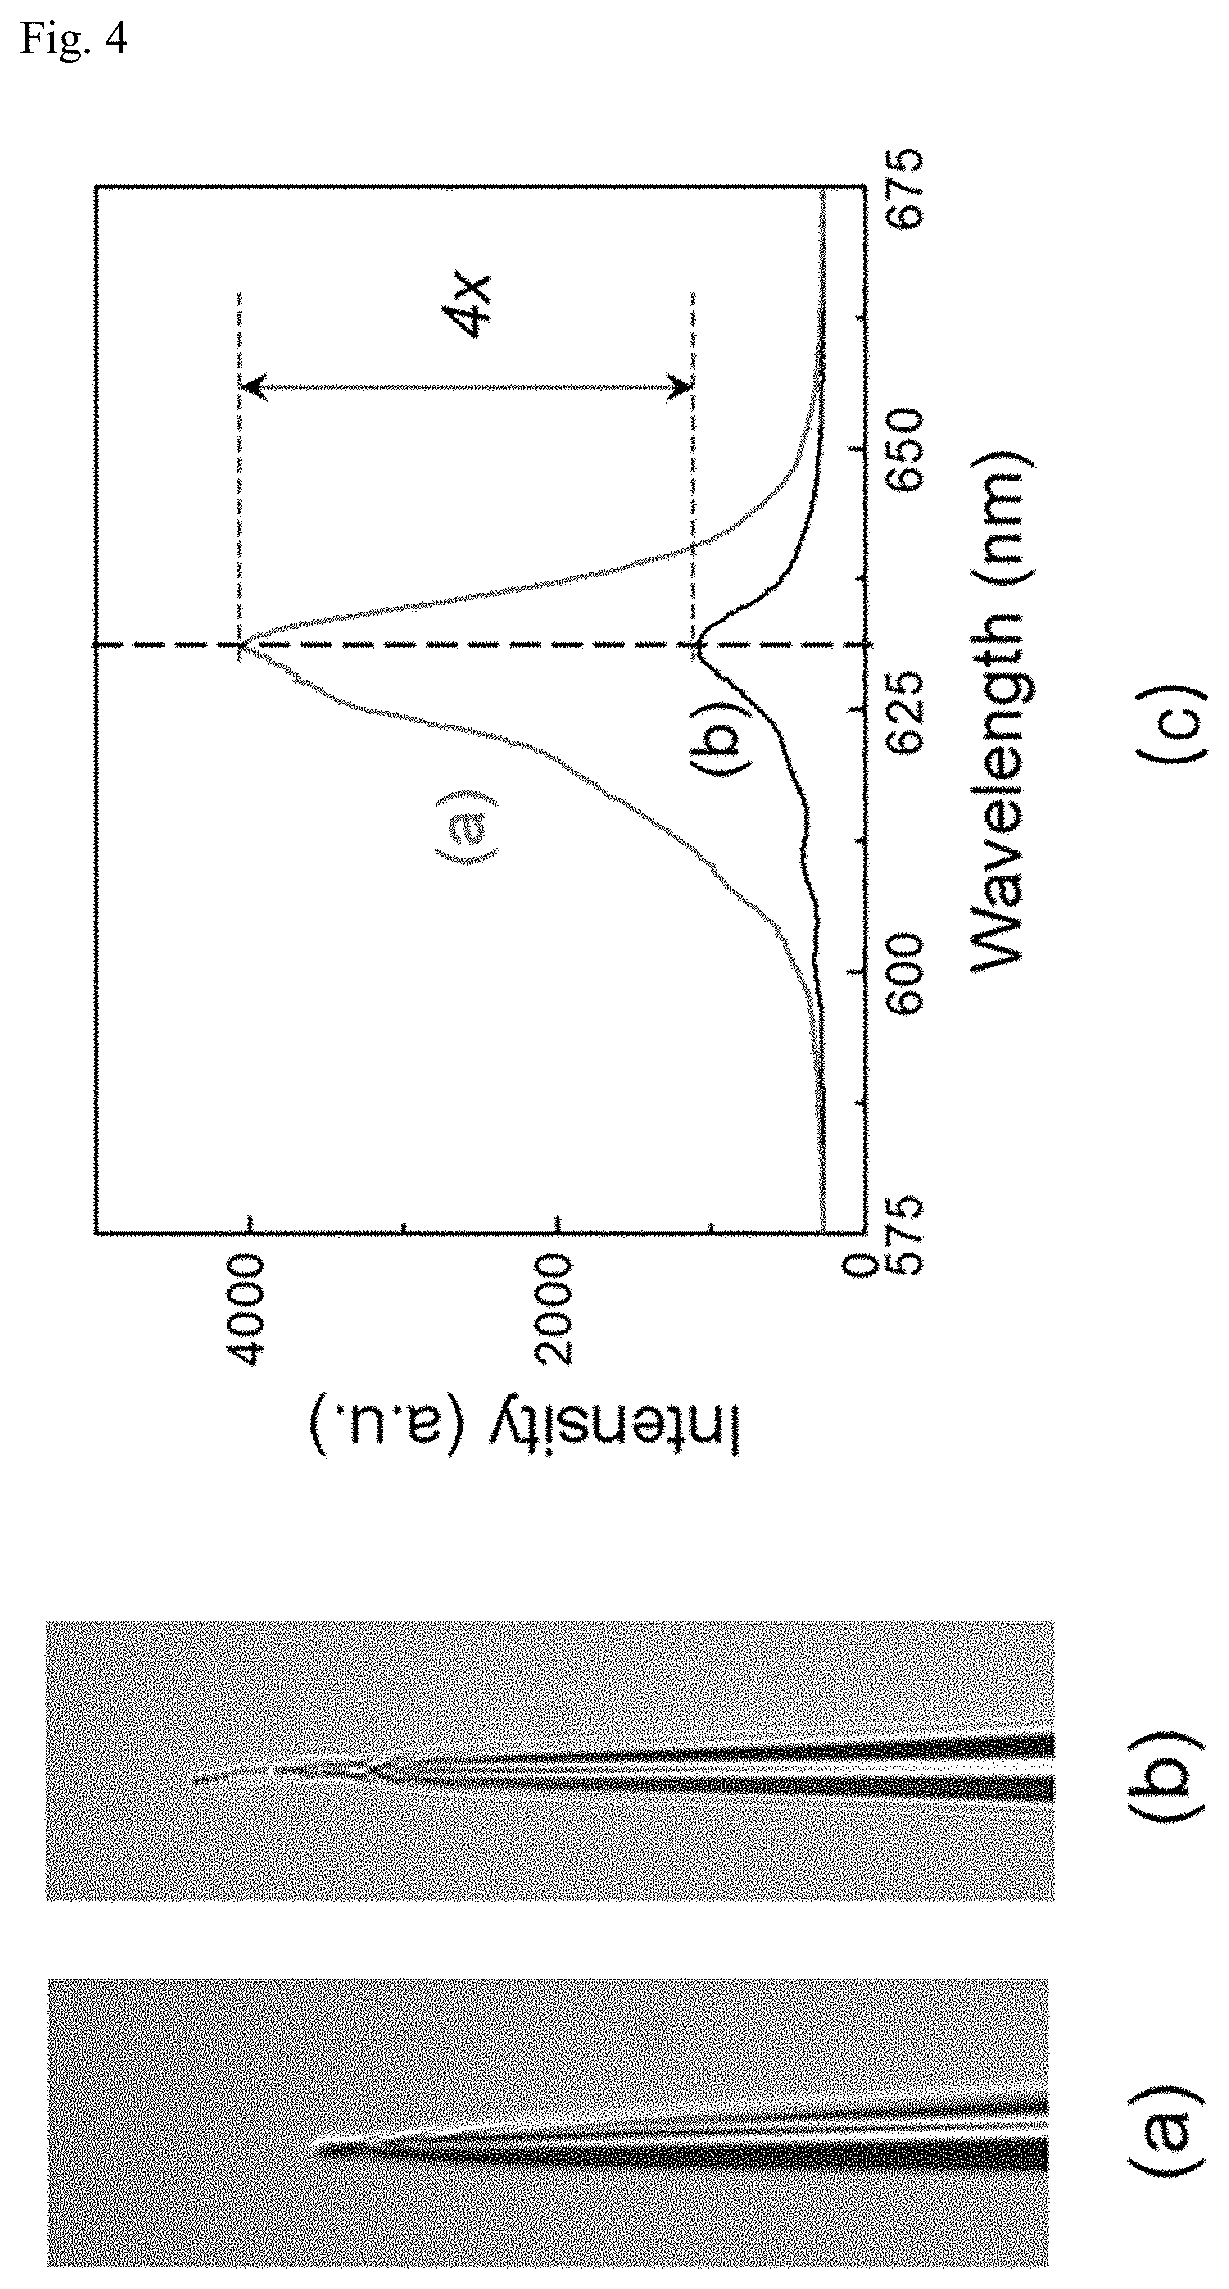 Method of fabricating nanowire connected with optical fiber using a micropipette